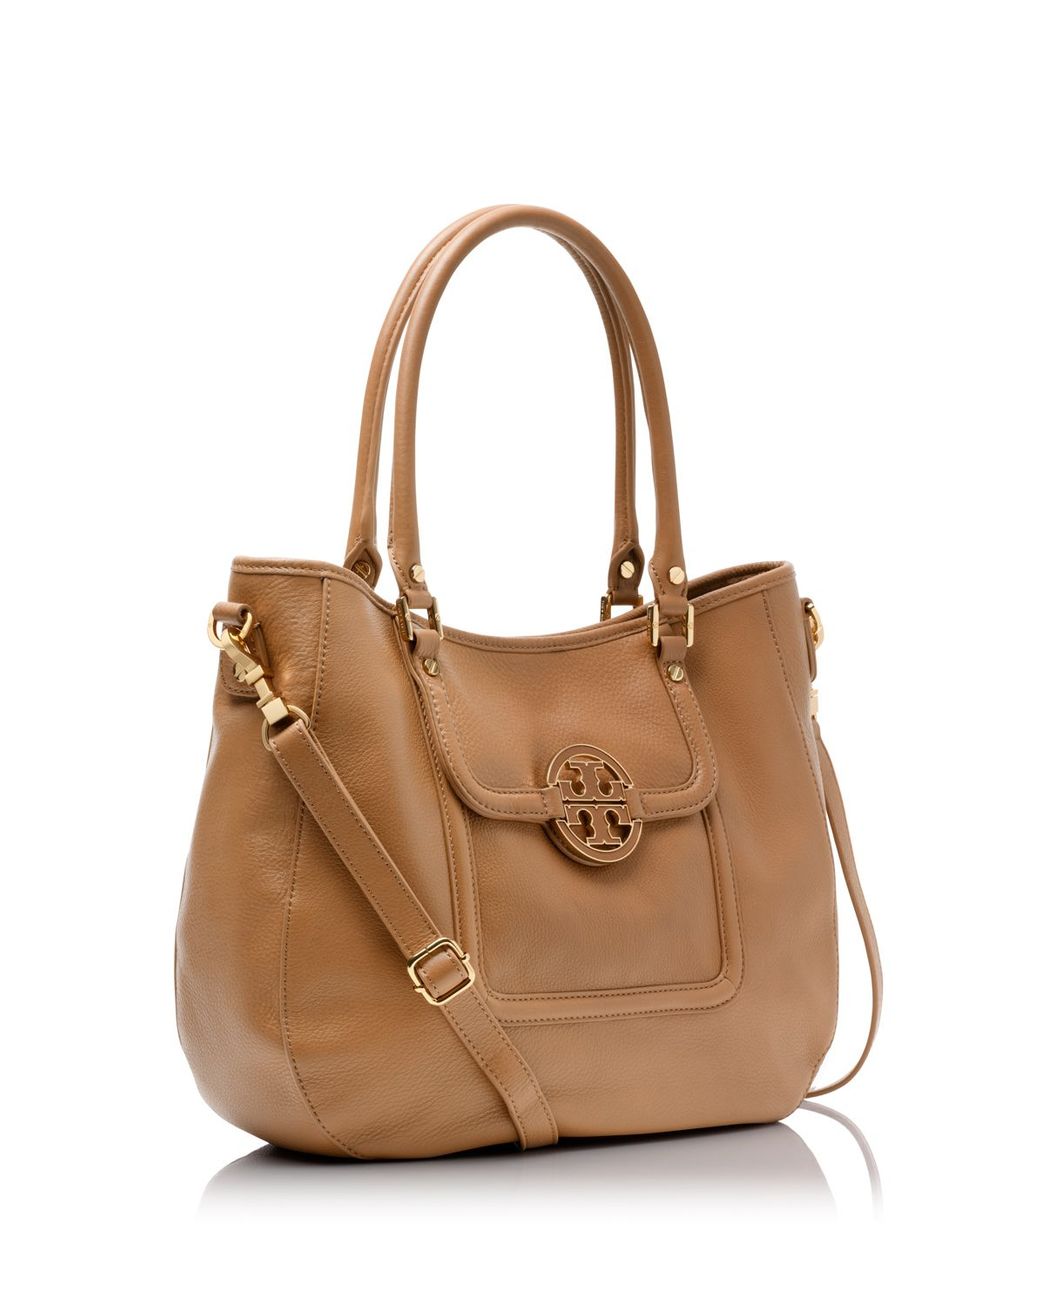 TORY BURCH Brown Leather Amanda Flat Hobo Bag #41156 – ALL YOUR BLISS